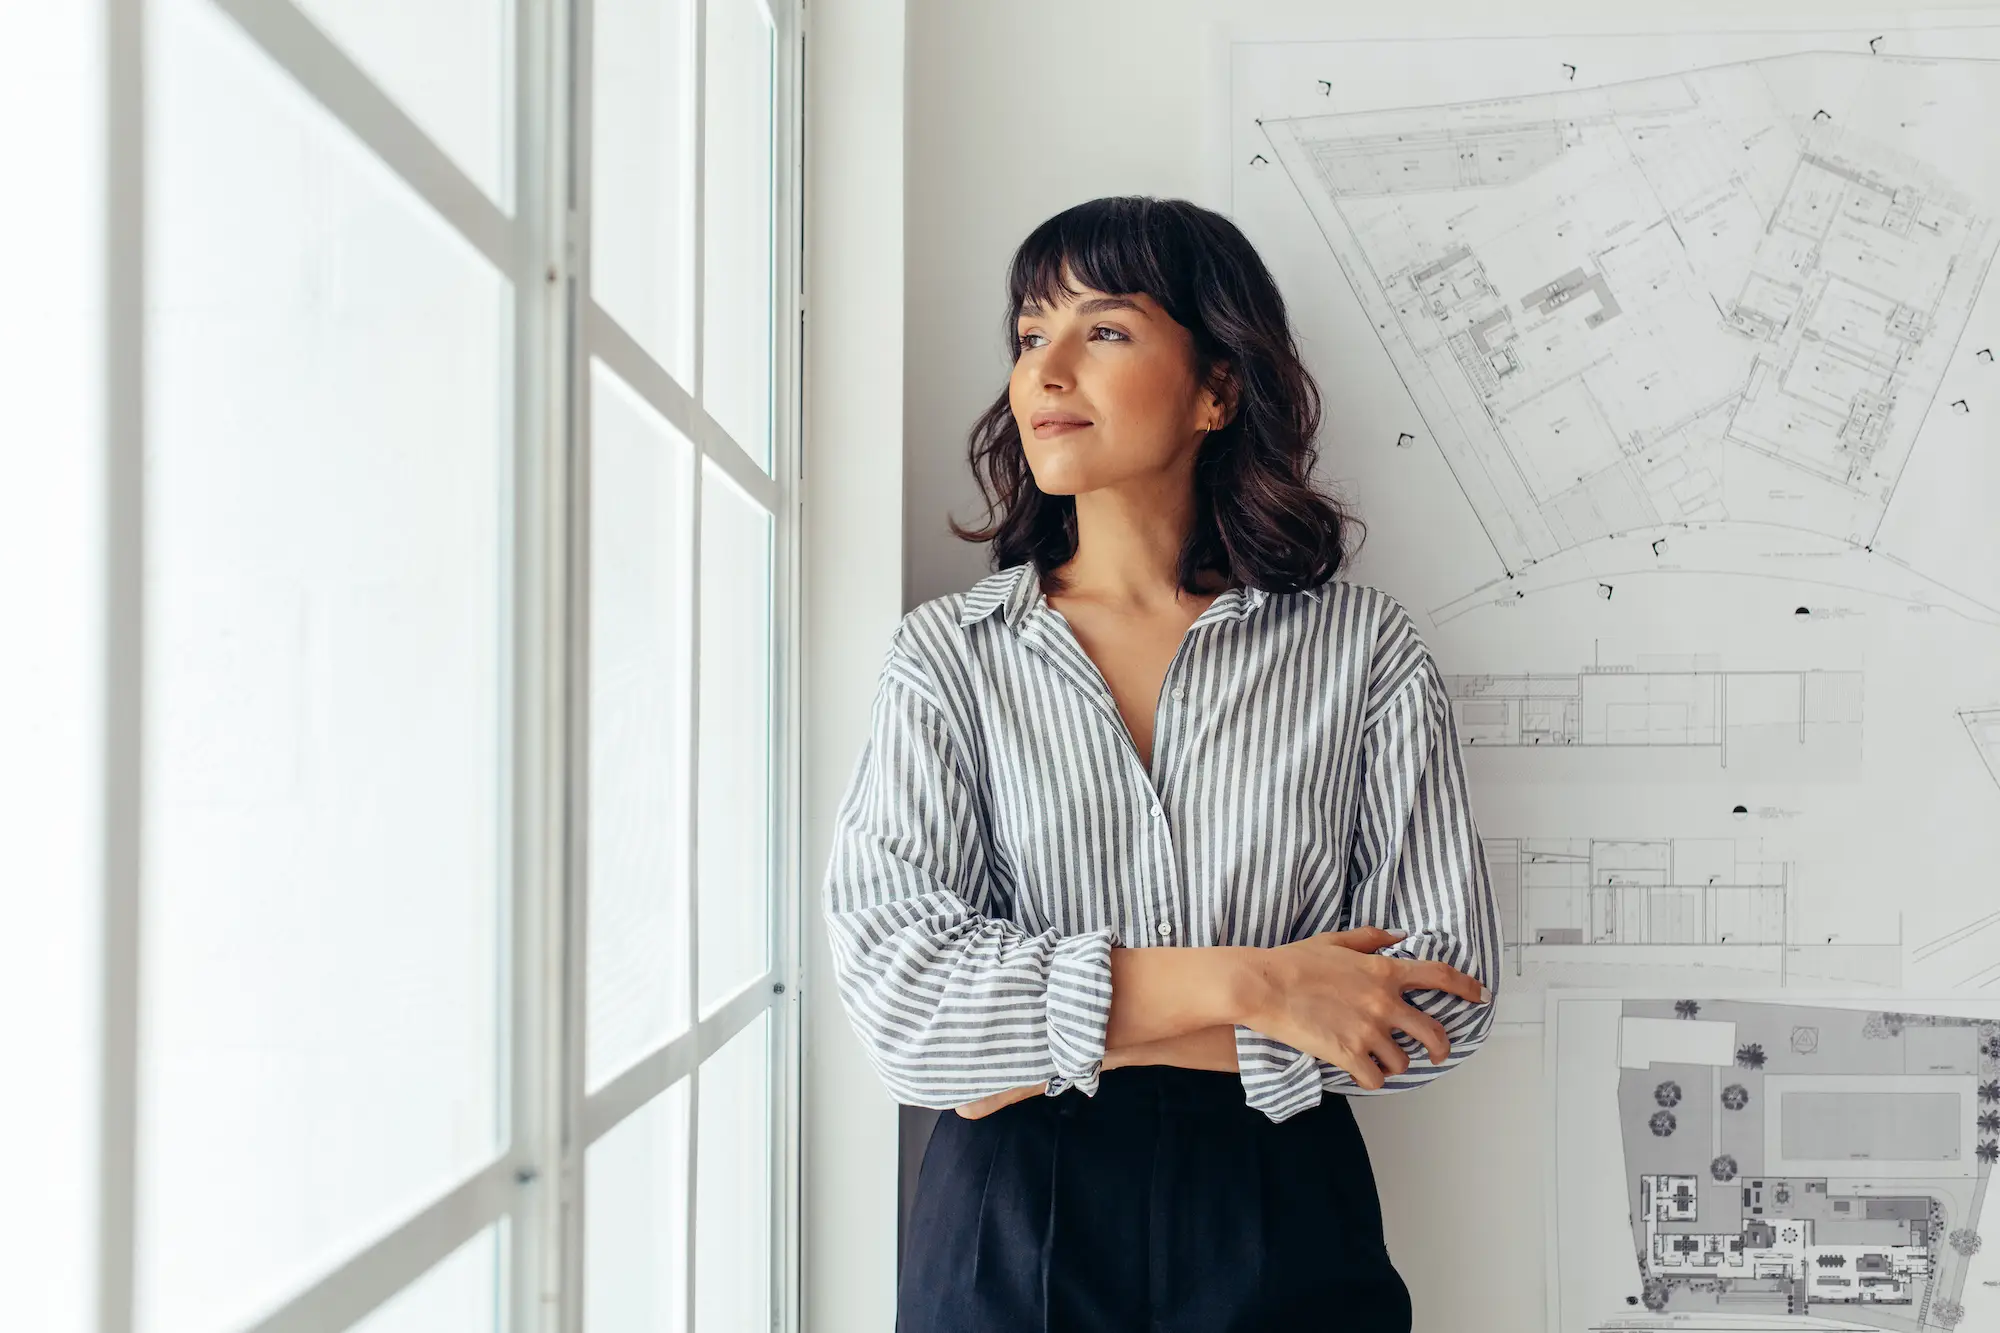 Female architect in an office environment